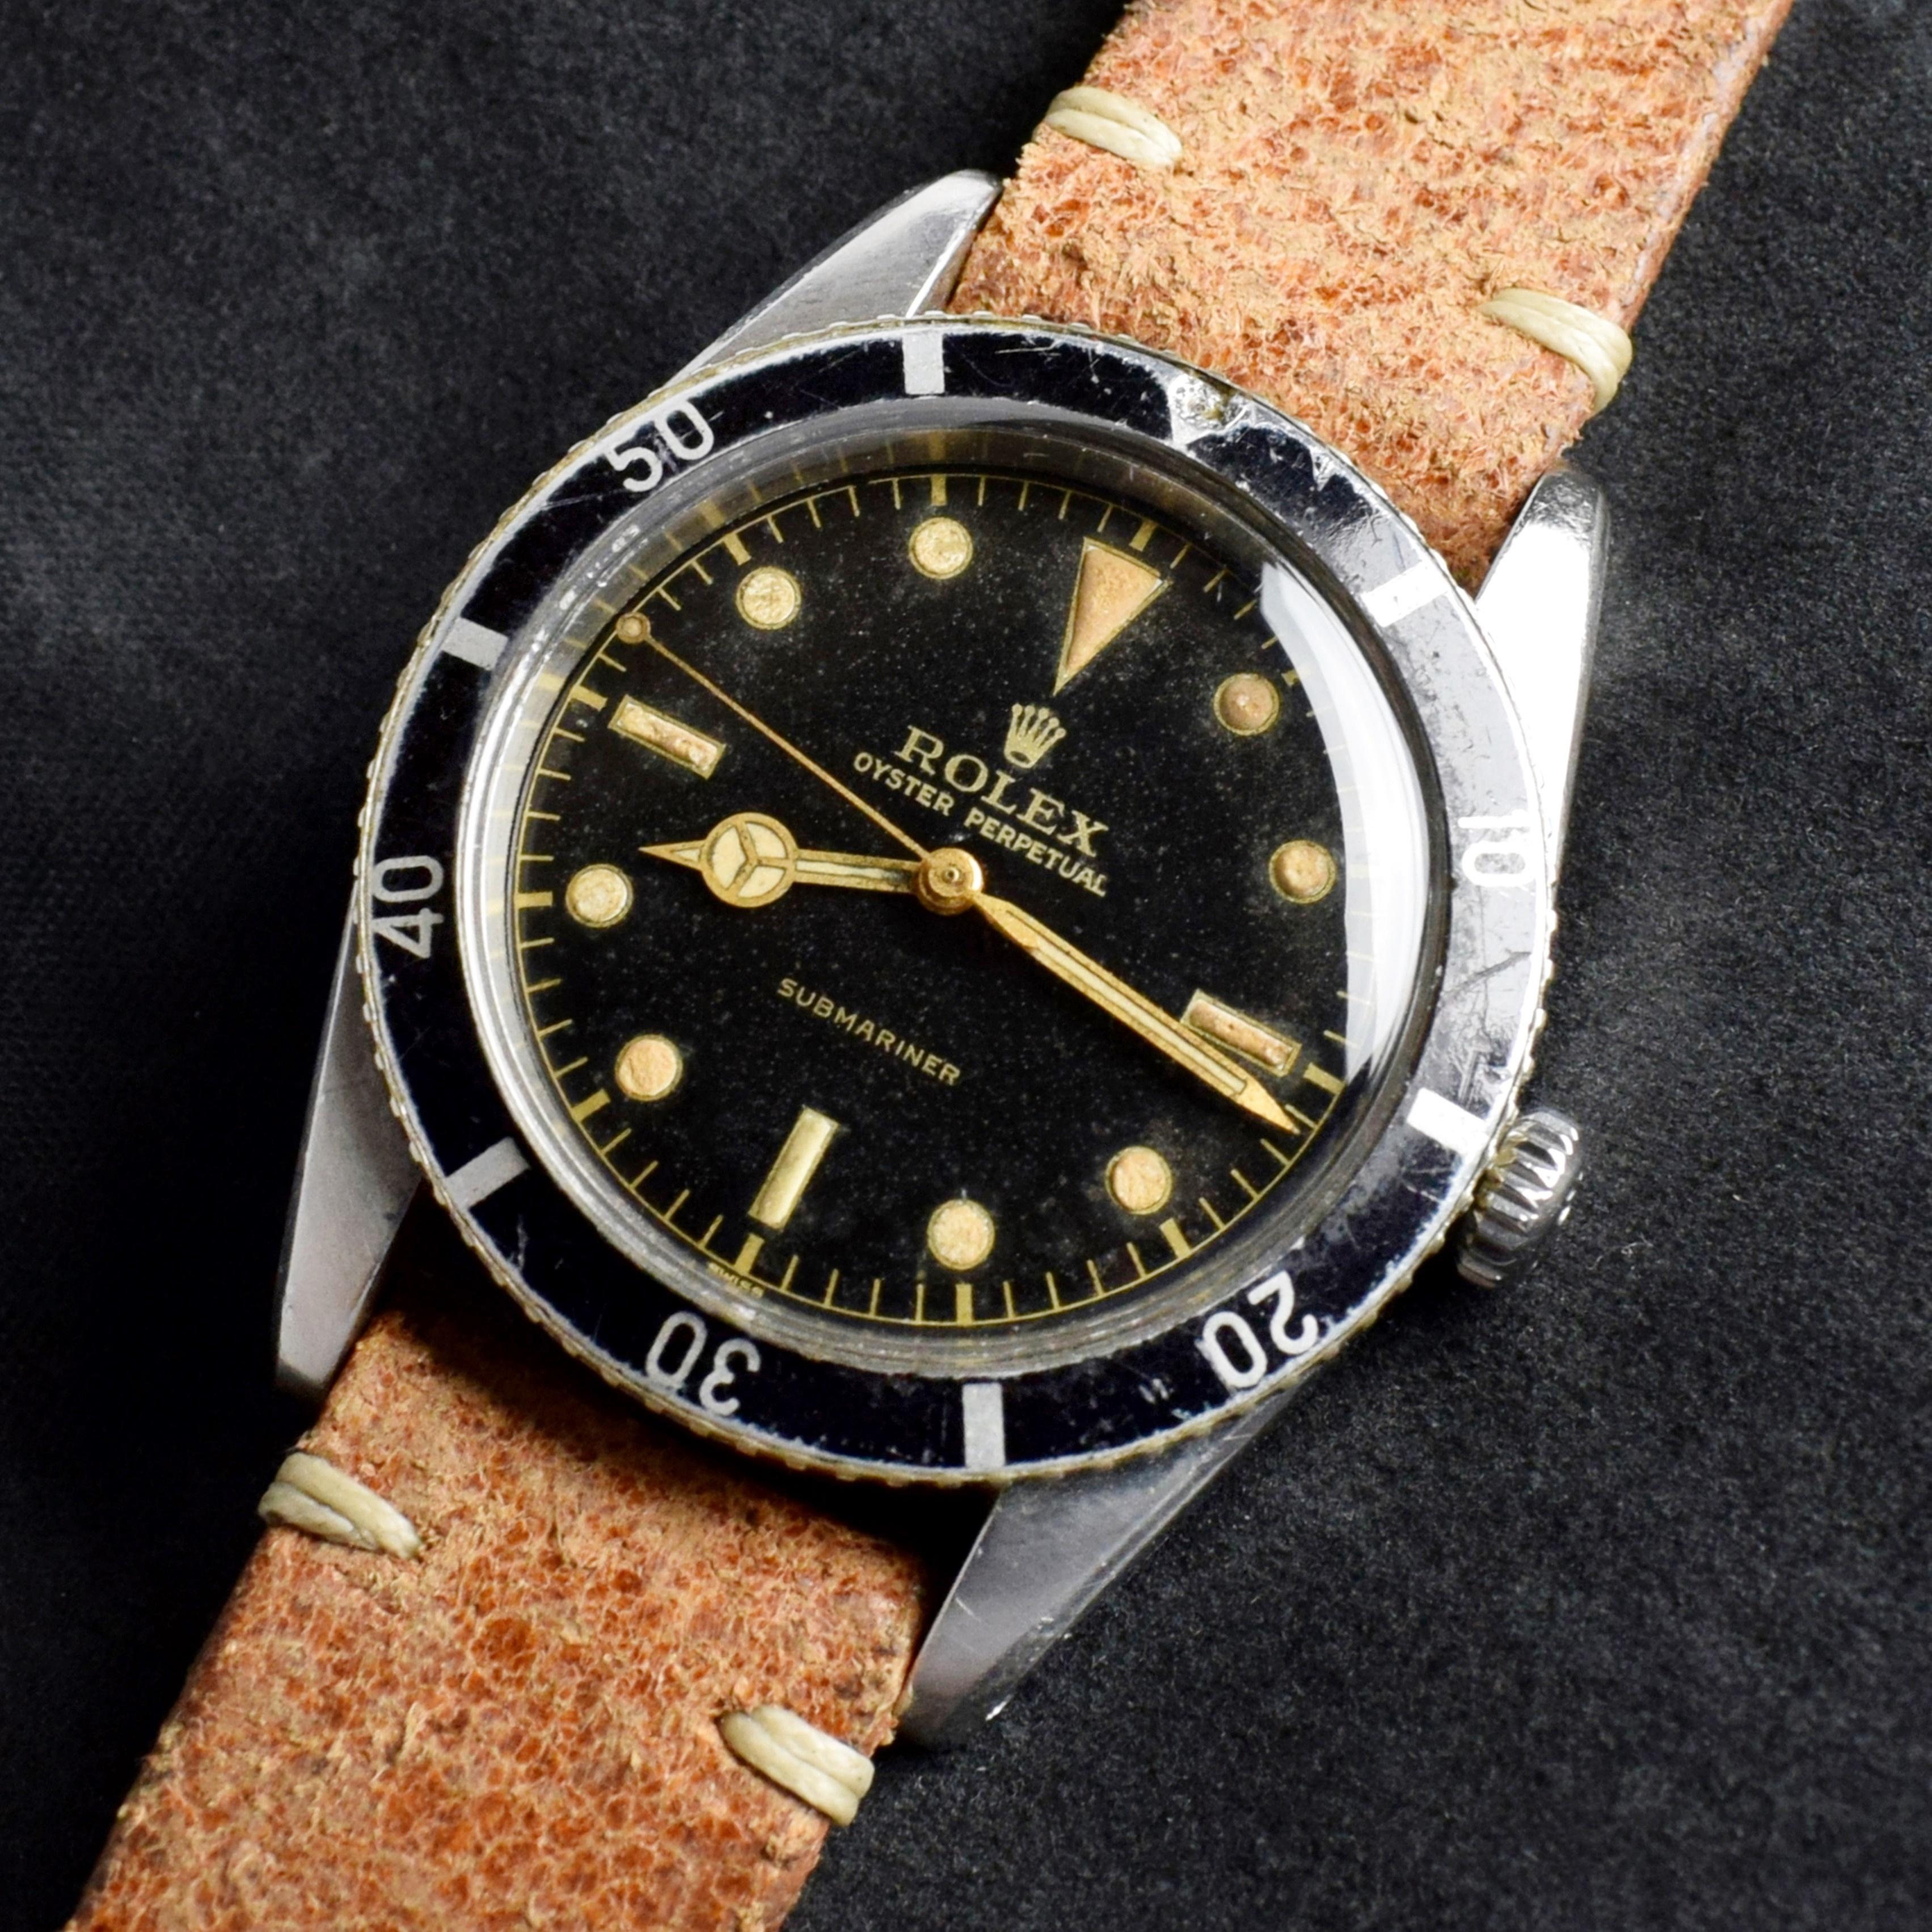 Brand: Vintage Rolex
Model: 6205
Year: 1954
Serial number: 21xxx
Reference: OT1504

Model 6204 as the first small crown submariner produced in 1953, guarantee depth rate 100 meters. The model 6205 was exclusively only available in 1954 and 1955